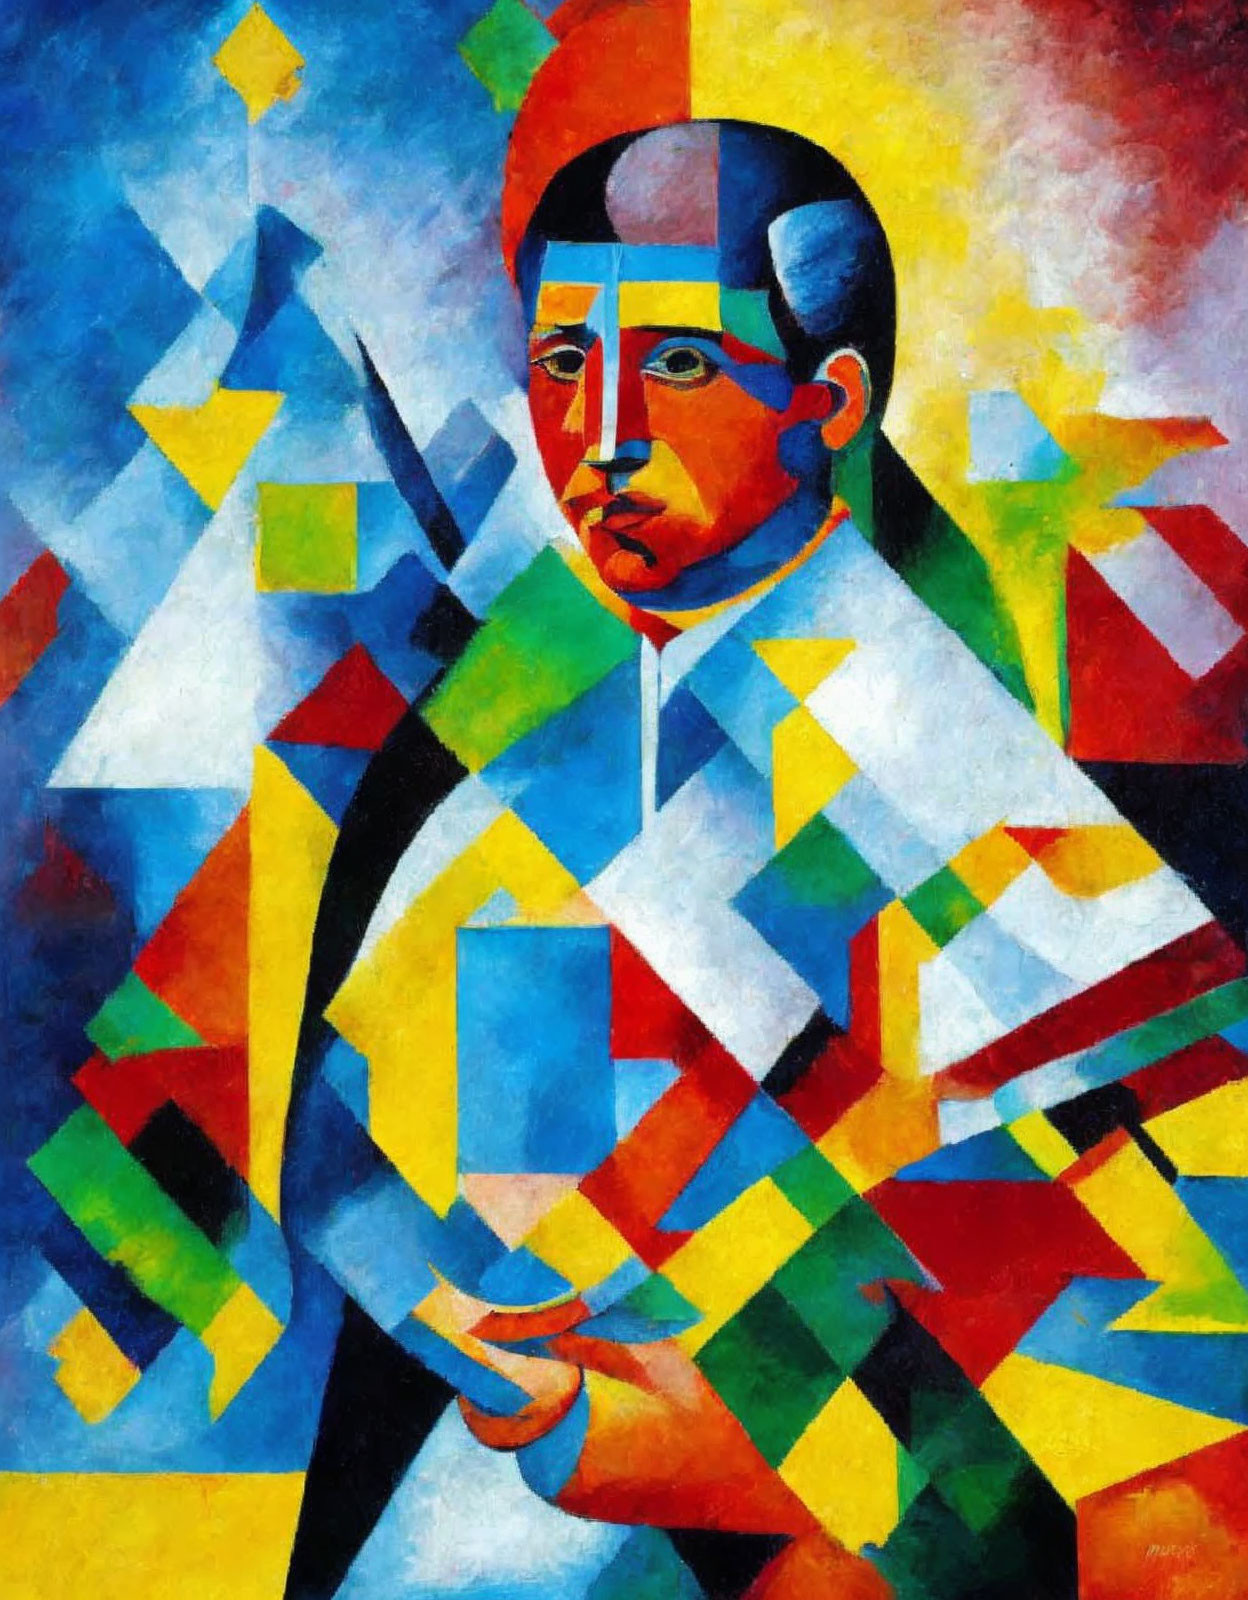 Abstract Cubist Portrait with Colorful Geometric Shapes